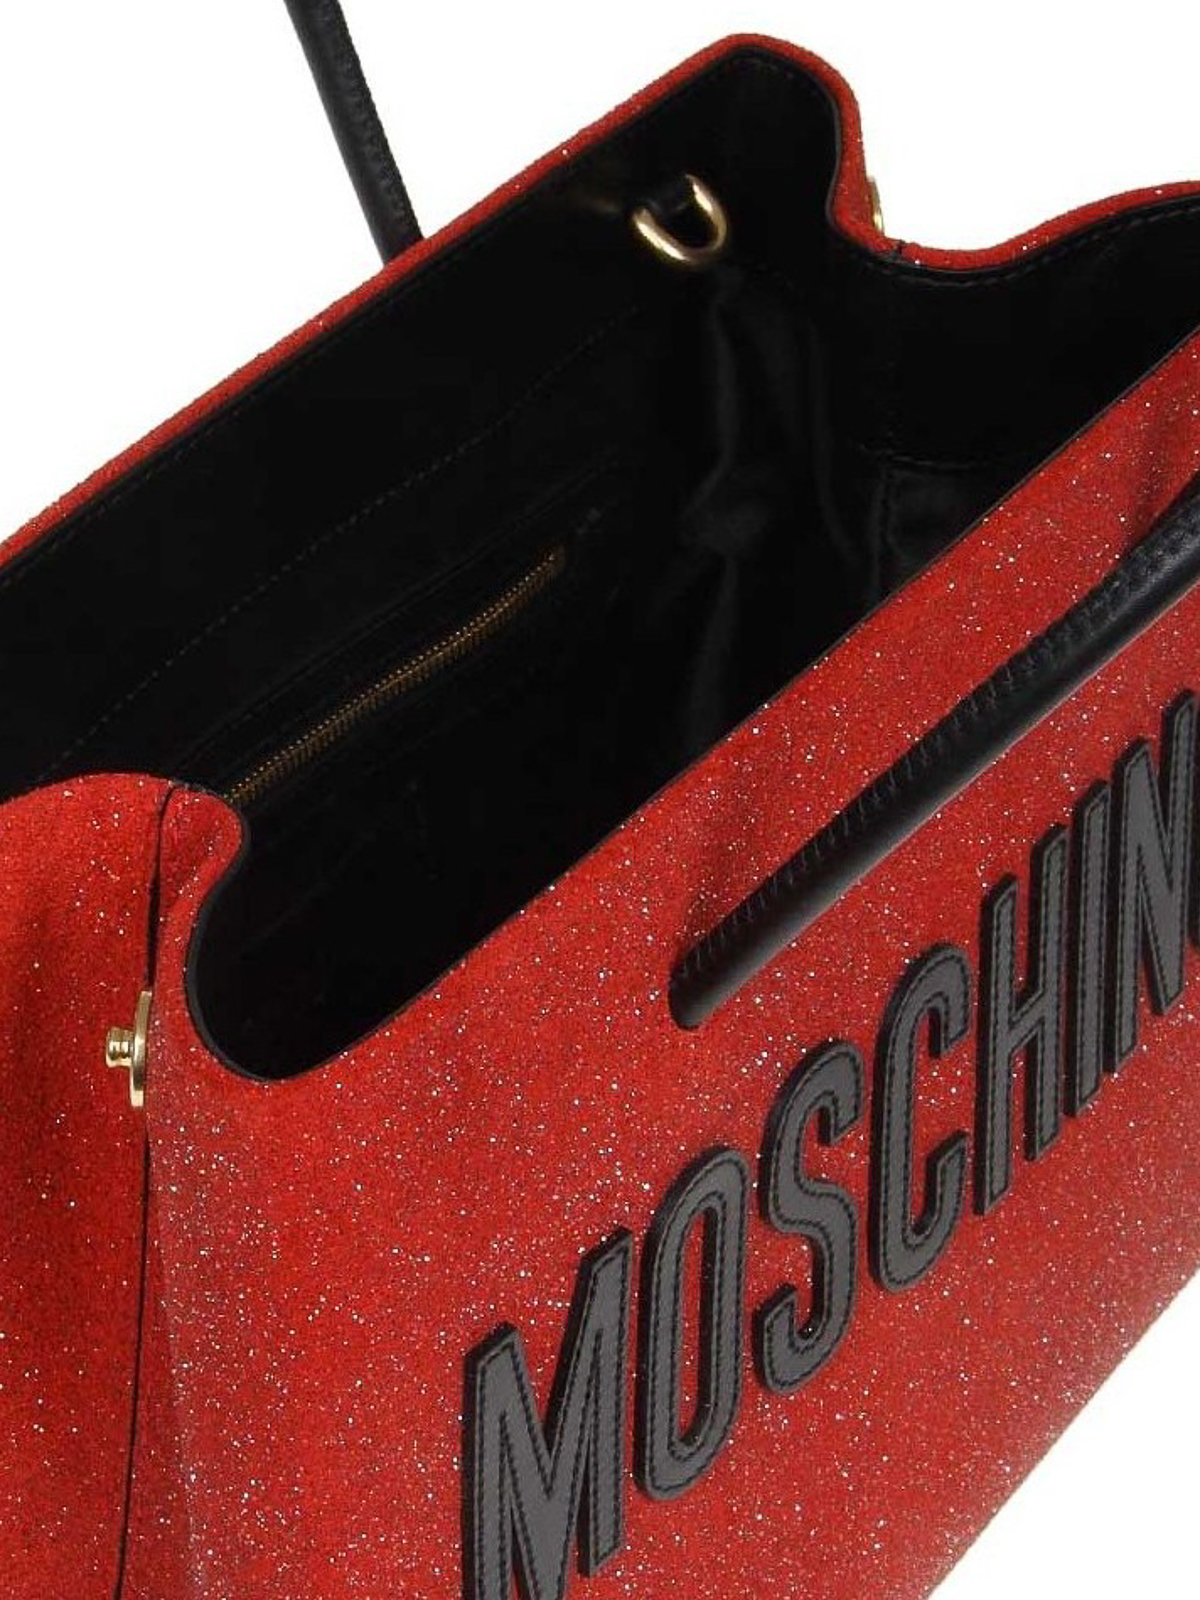 Totes bags Moschino - Red glittered suede tote - 746480082115